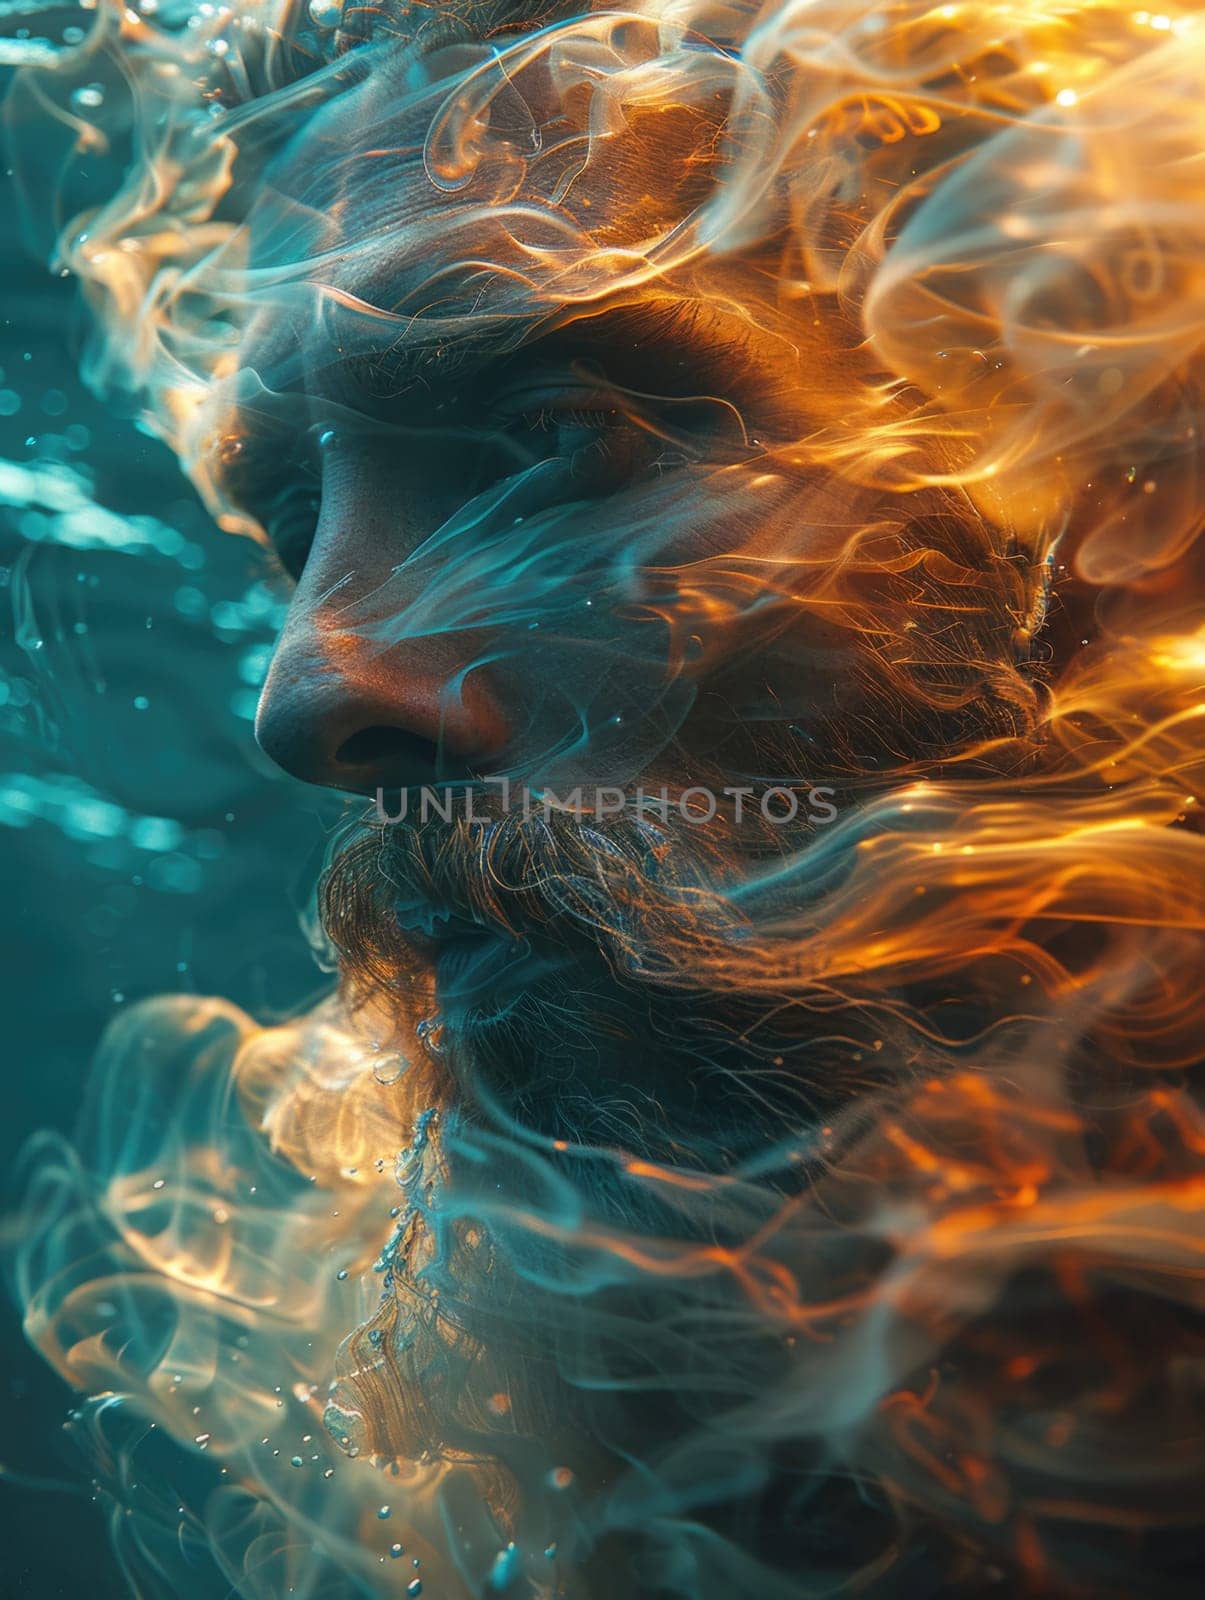 Bearded Man With Long Hair in Water by but_photo